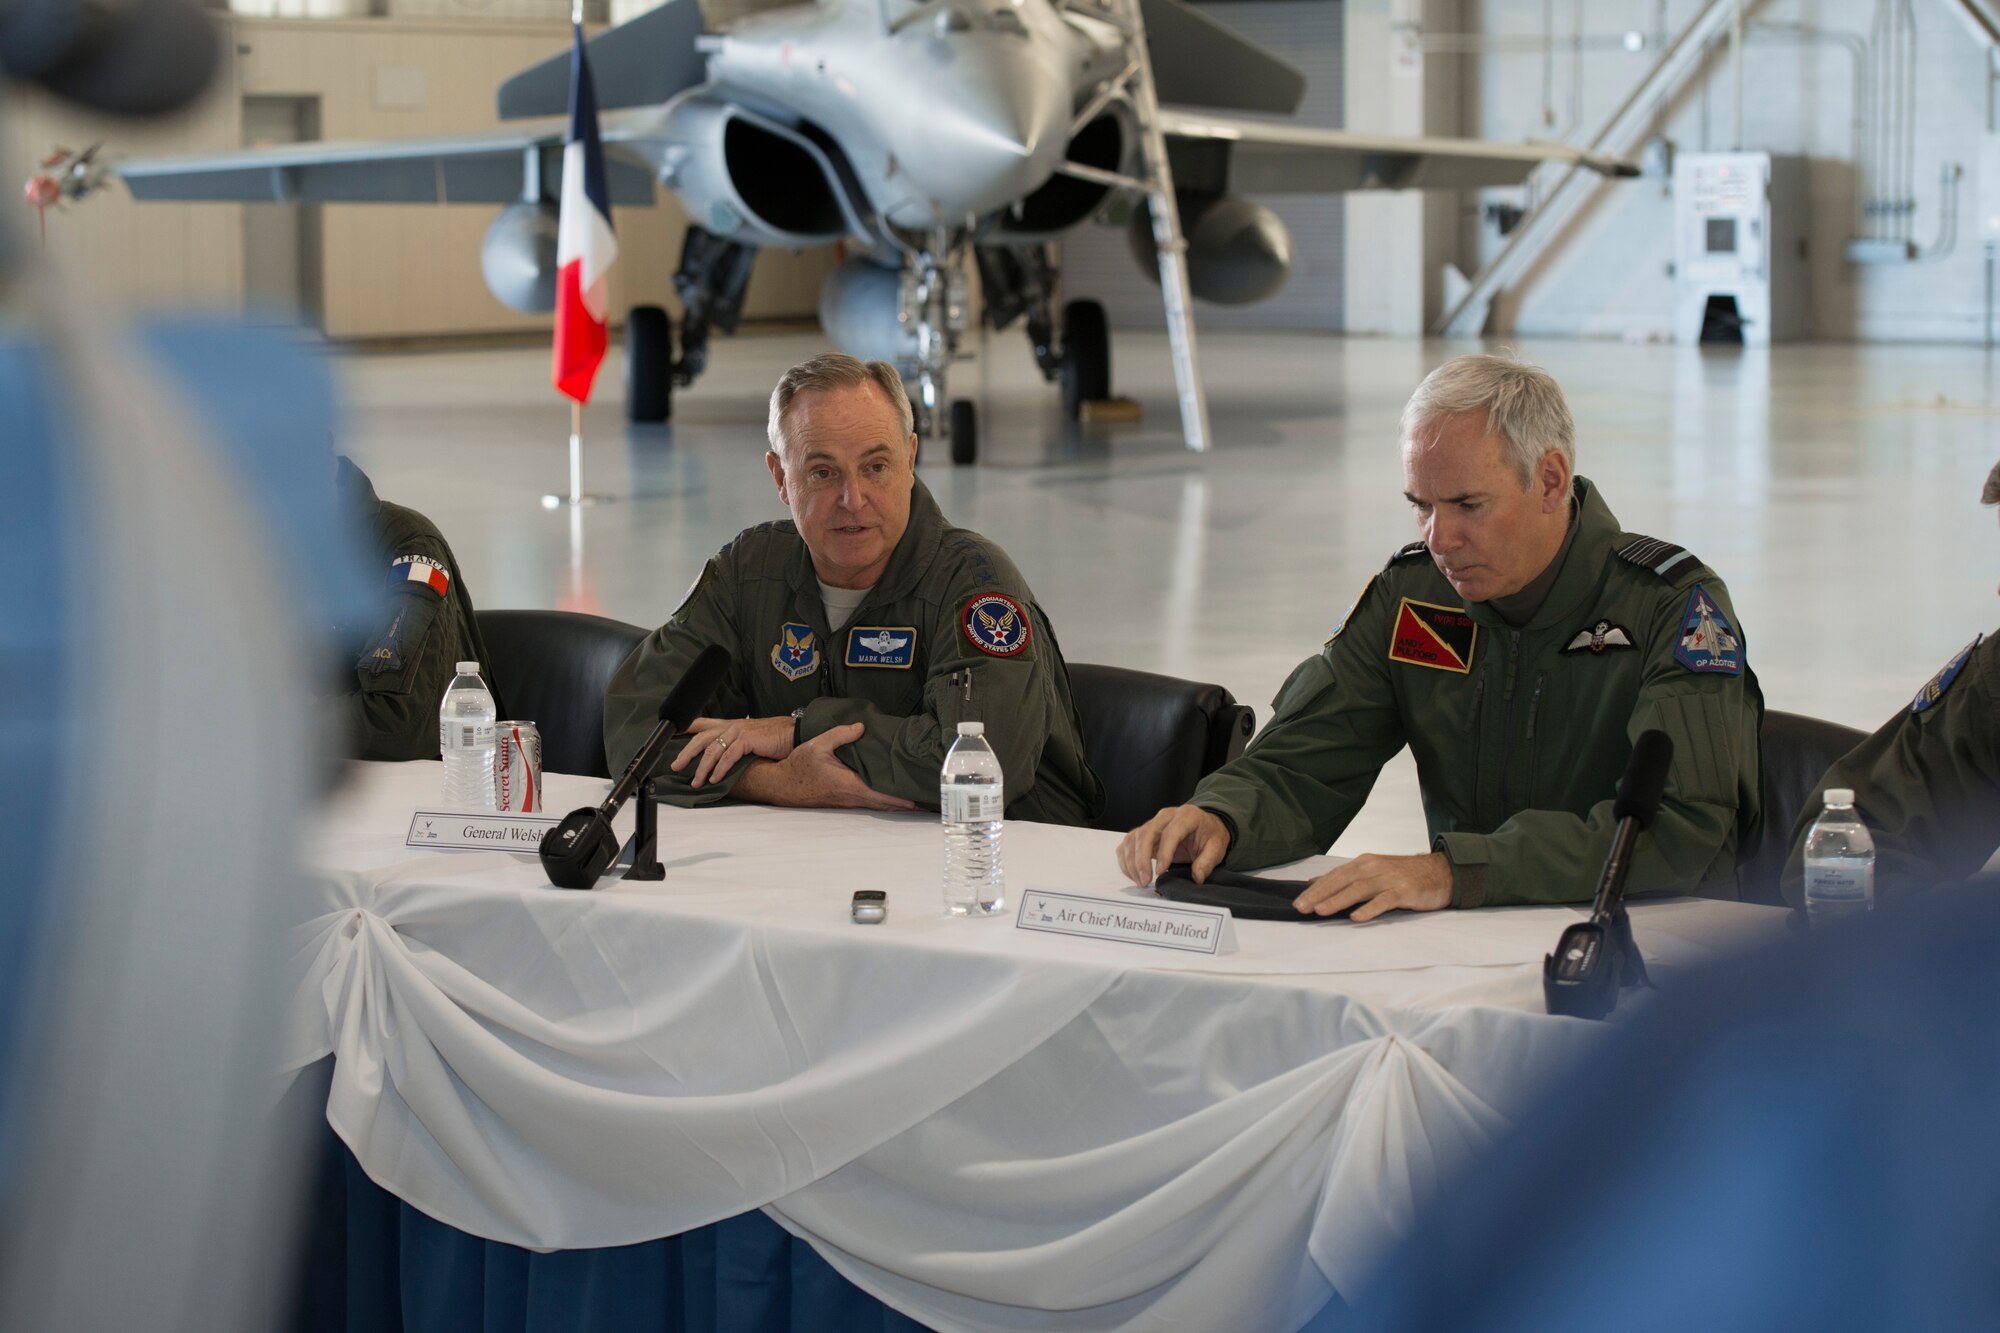 Chief of Staff of the U.S. Air Force Gen. Mark A. Welsh III and British Royal Air Force Chief of the Air Staff, Air Chief Marshall Sir Andrew Pulford answer questions during a press conference hosted during the Trilateral Exercise at Langley Air Force Base, Va., Dec. 15, 2015.  The exercise, which aims to give coalition forces an opportunity to hone skills during simulated adversarial scenarios, kicked off Dec. 2, 2015 and is scheduled to conclude Dec. 18, 2015. (U.S. Air Force photo by Tech. Sgt. Katie Gar Ward)